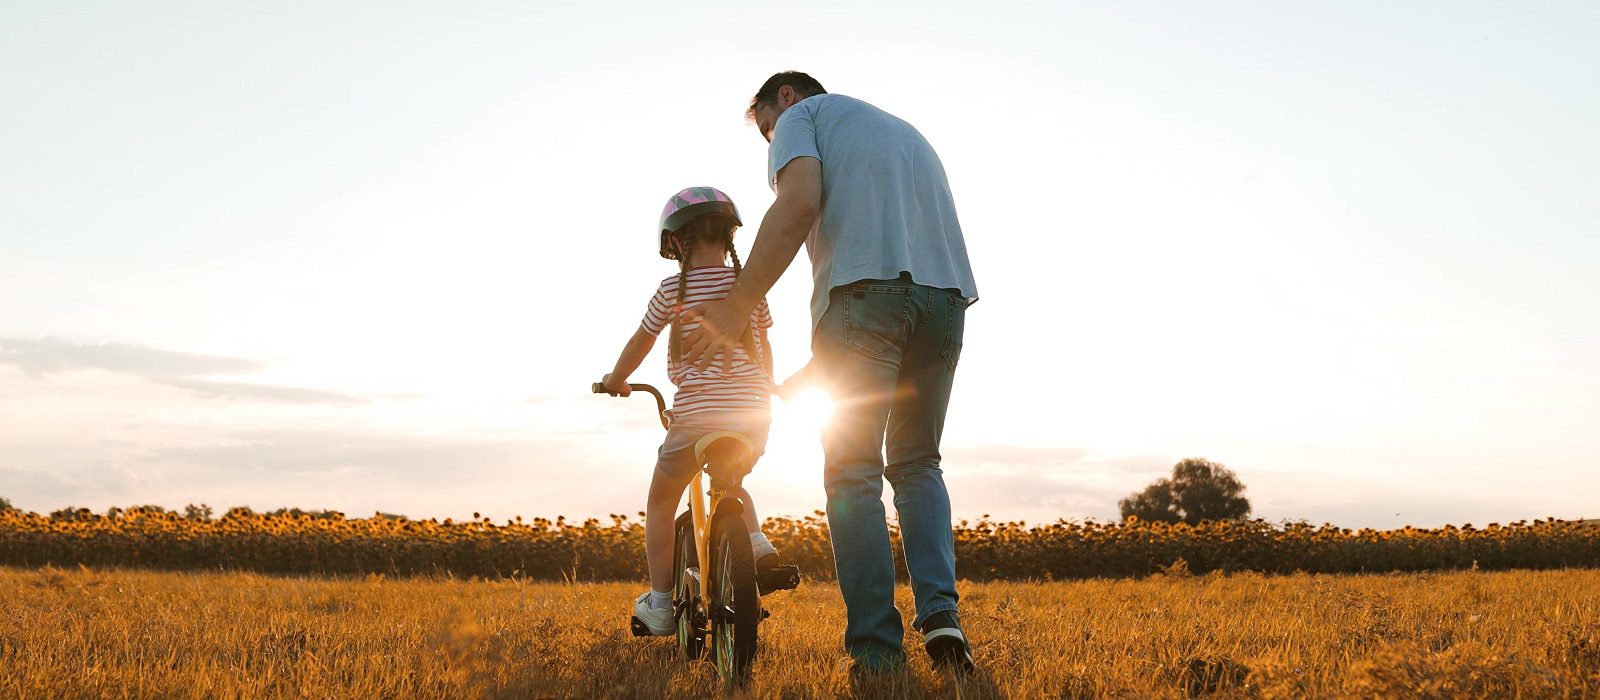 Caring father helps little daughter to ride bicycle in evening meadow. Father teaches little girl to ride bicycle in summer park. Father and little daughter train bicycle riding on rural weekend